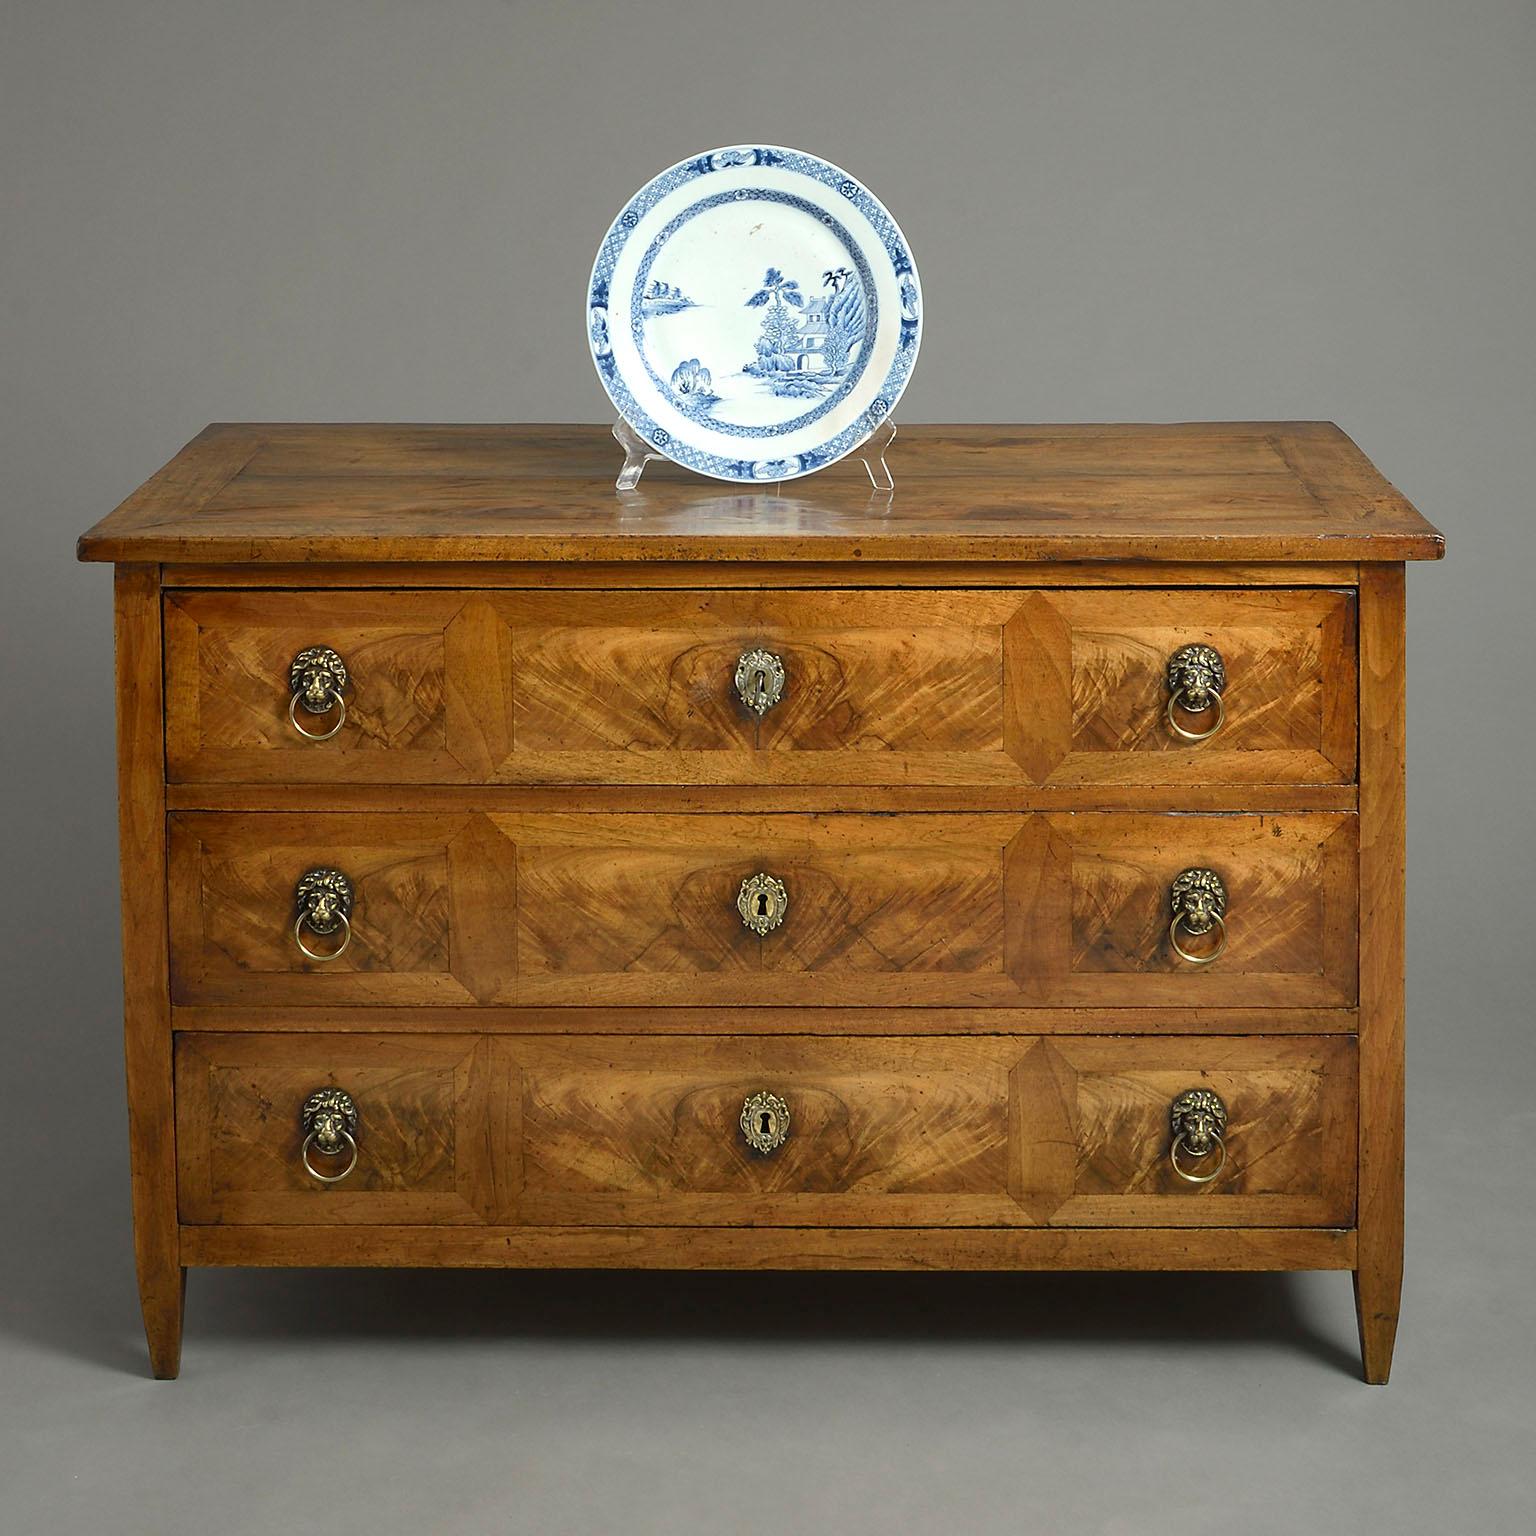 A fine late 18th century walnut commode of good soft color in the neoclassical manner, the overhanging top above three finely figured panel veneered drawers, with brass lion mask handles and lock escutcheons, all raised on square tapering feet.